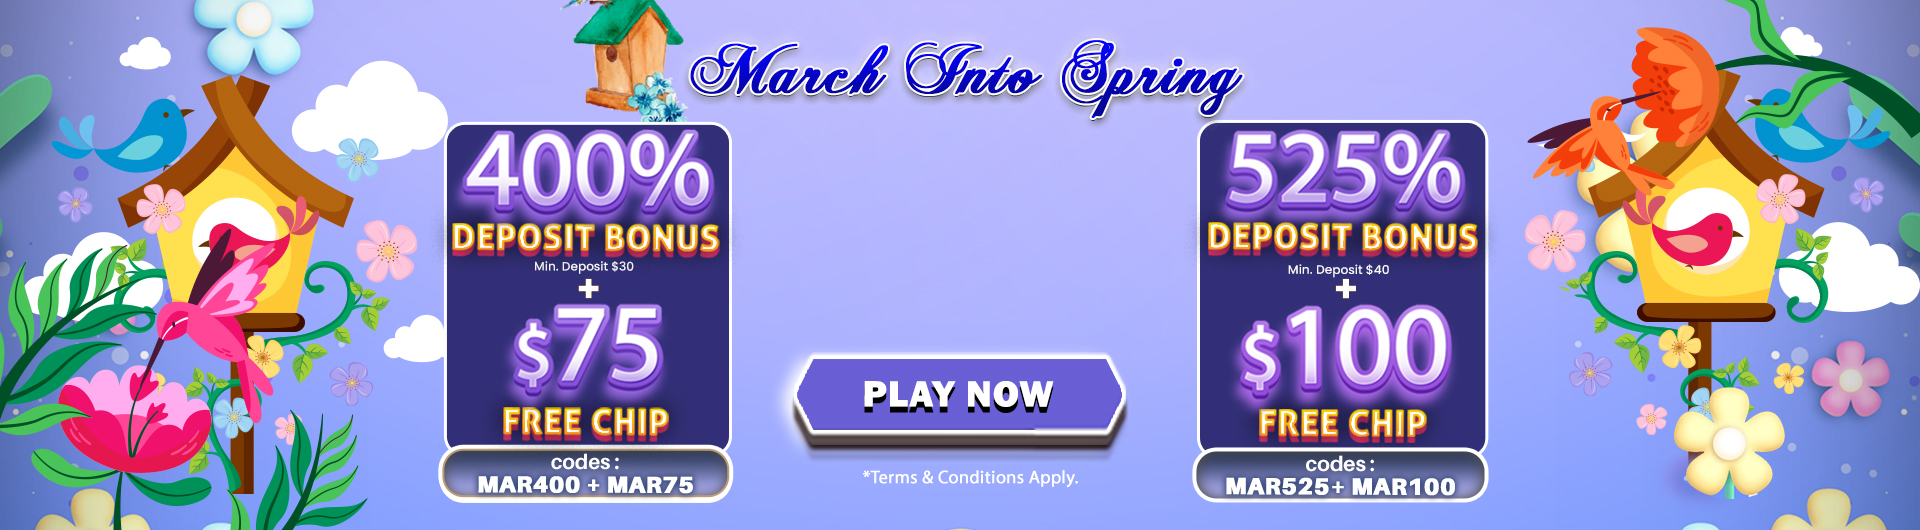 march_Into_spring